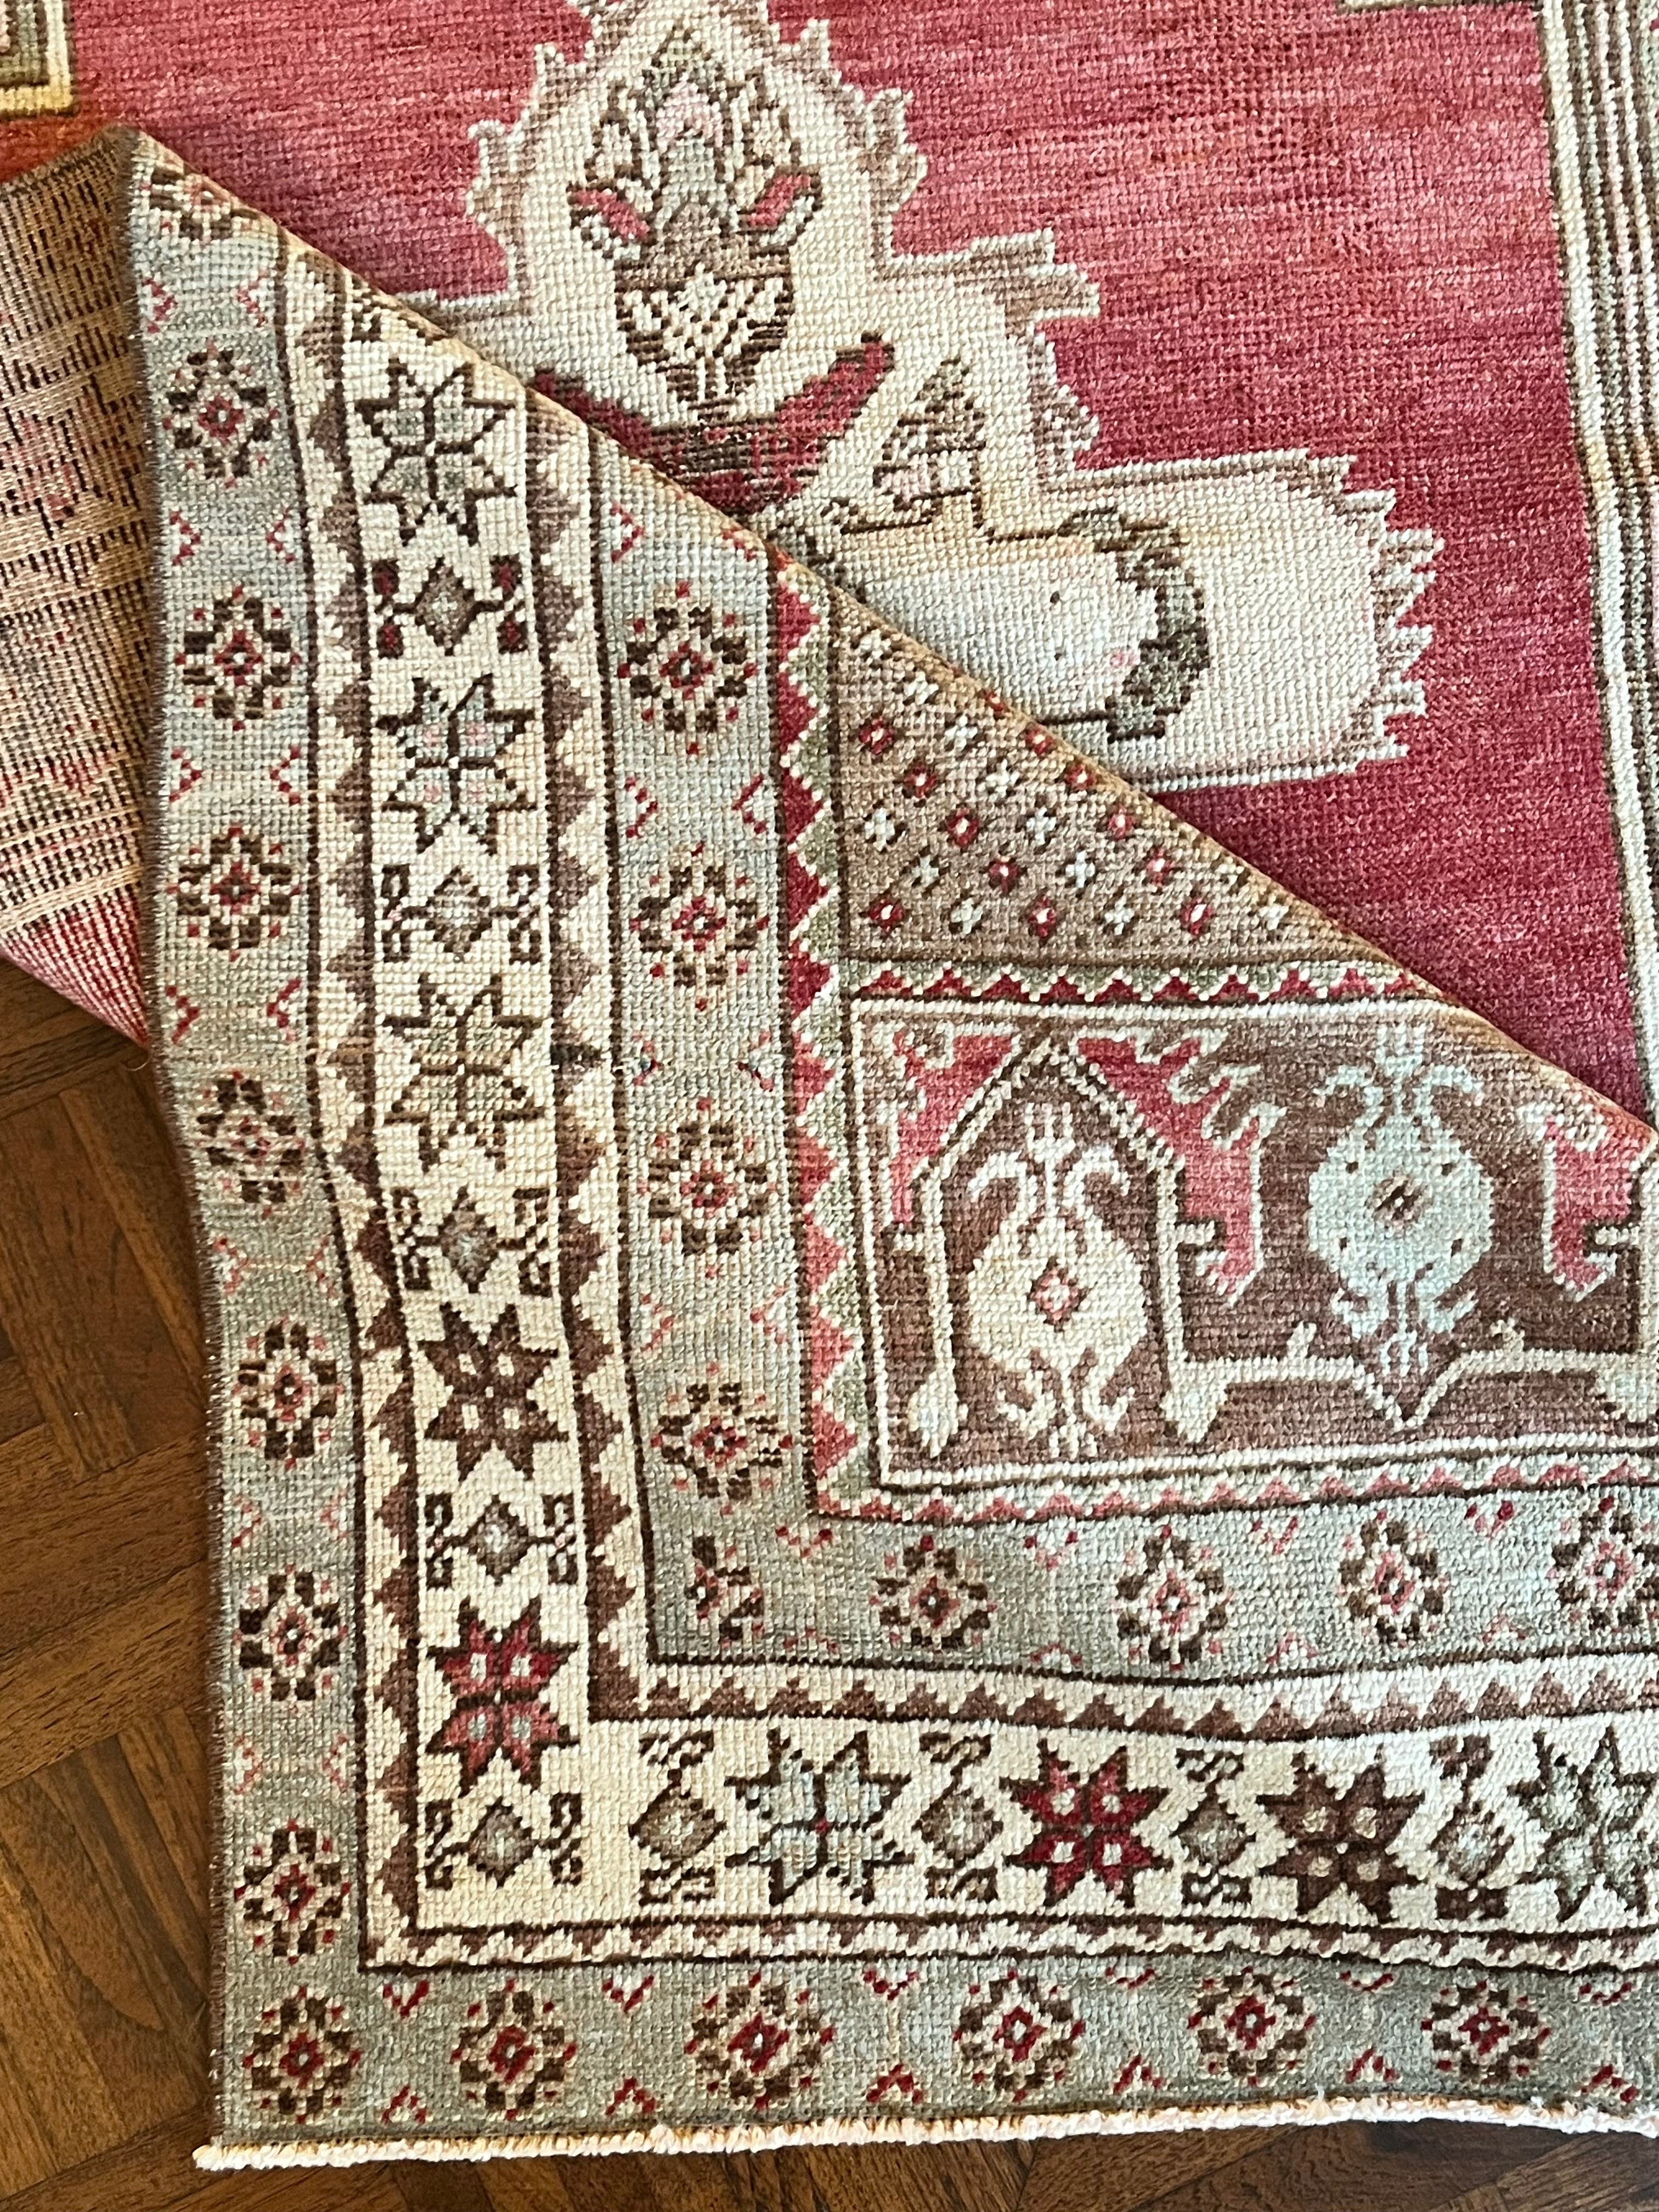 #9 Vintage Turkish Rug 3'4"x6' "When Doves Cry"